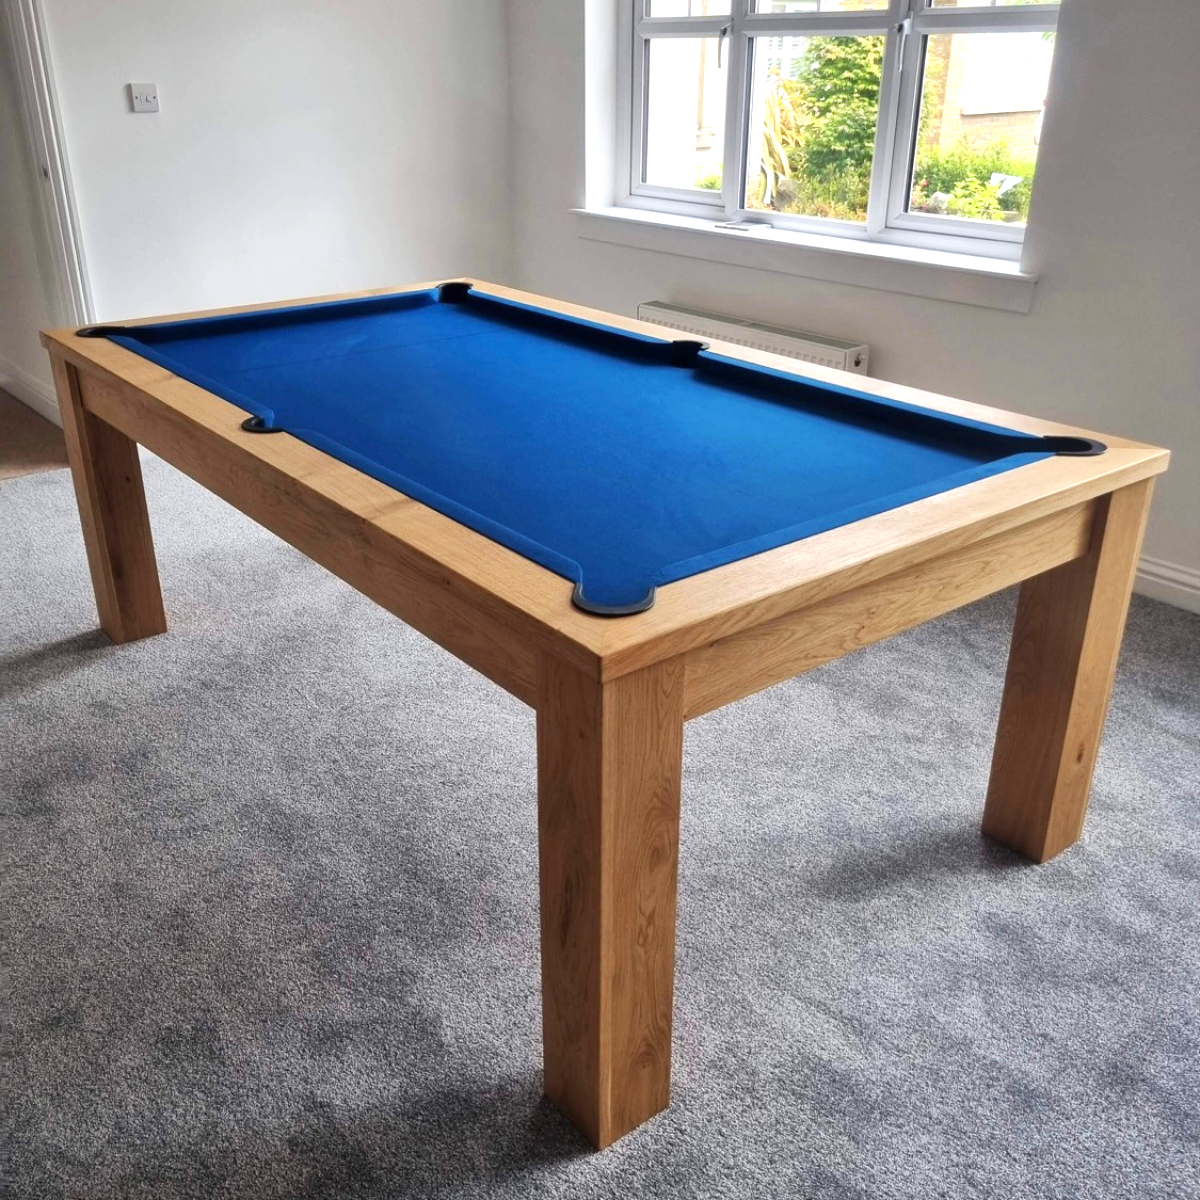 The Elixir 6ft & 7ft British Pool Table W/Dining Top Natural Oak